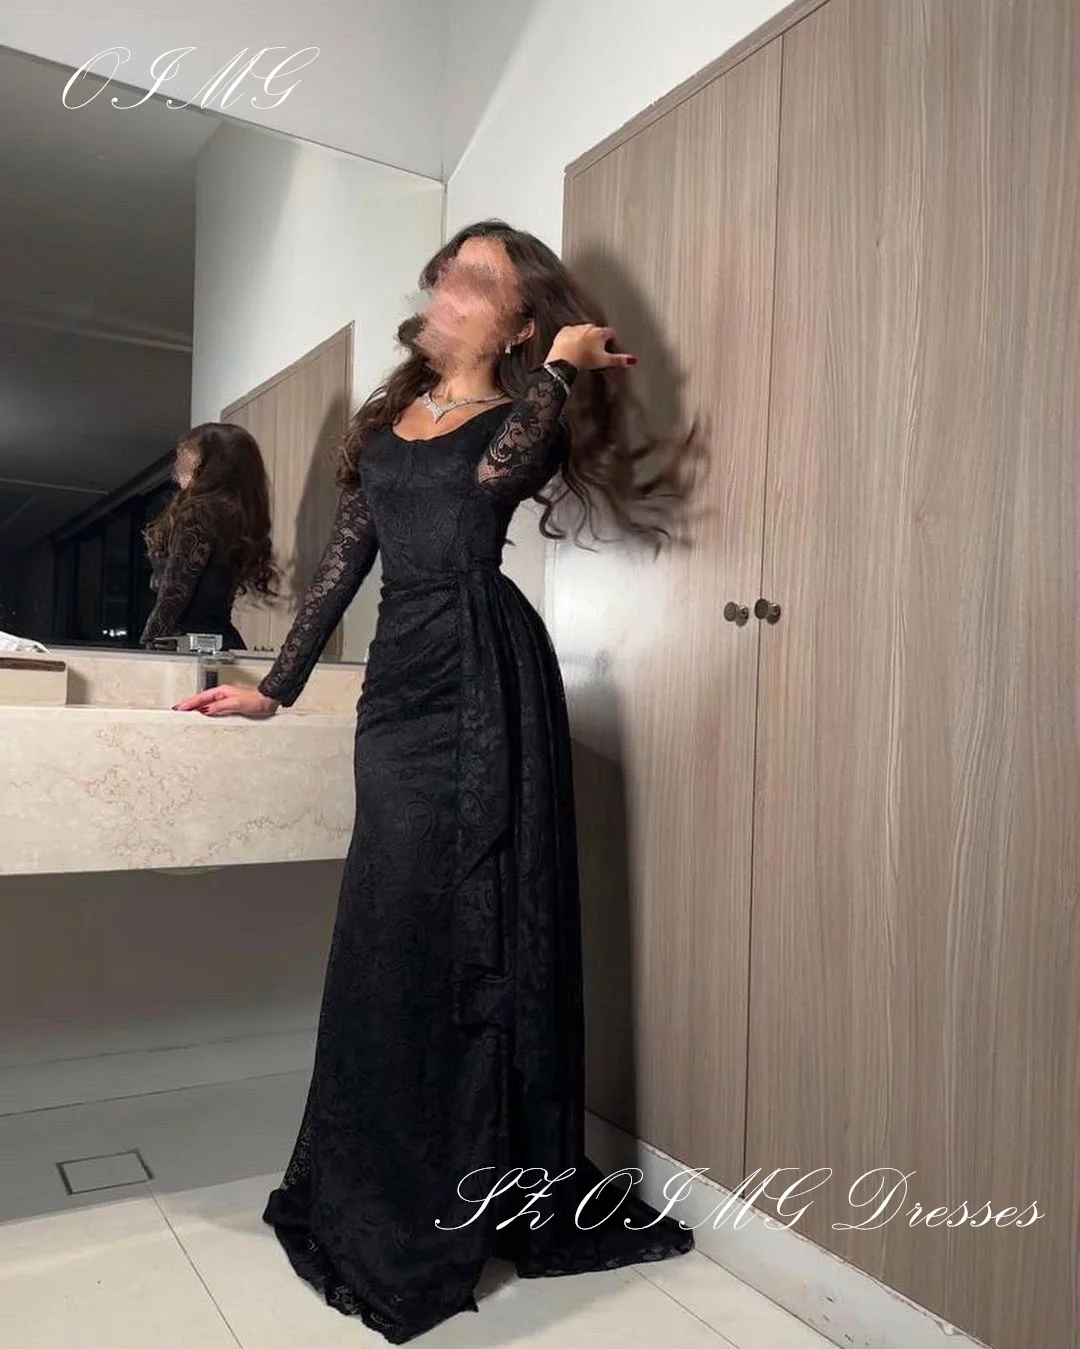 OIMG Black U Neck Lace Prom Dresses Long Sleeves Mermaid Women Floor Length Ruched Evening Gowns Occasion Formal Party Dress